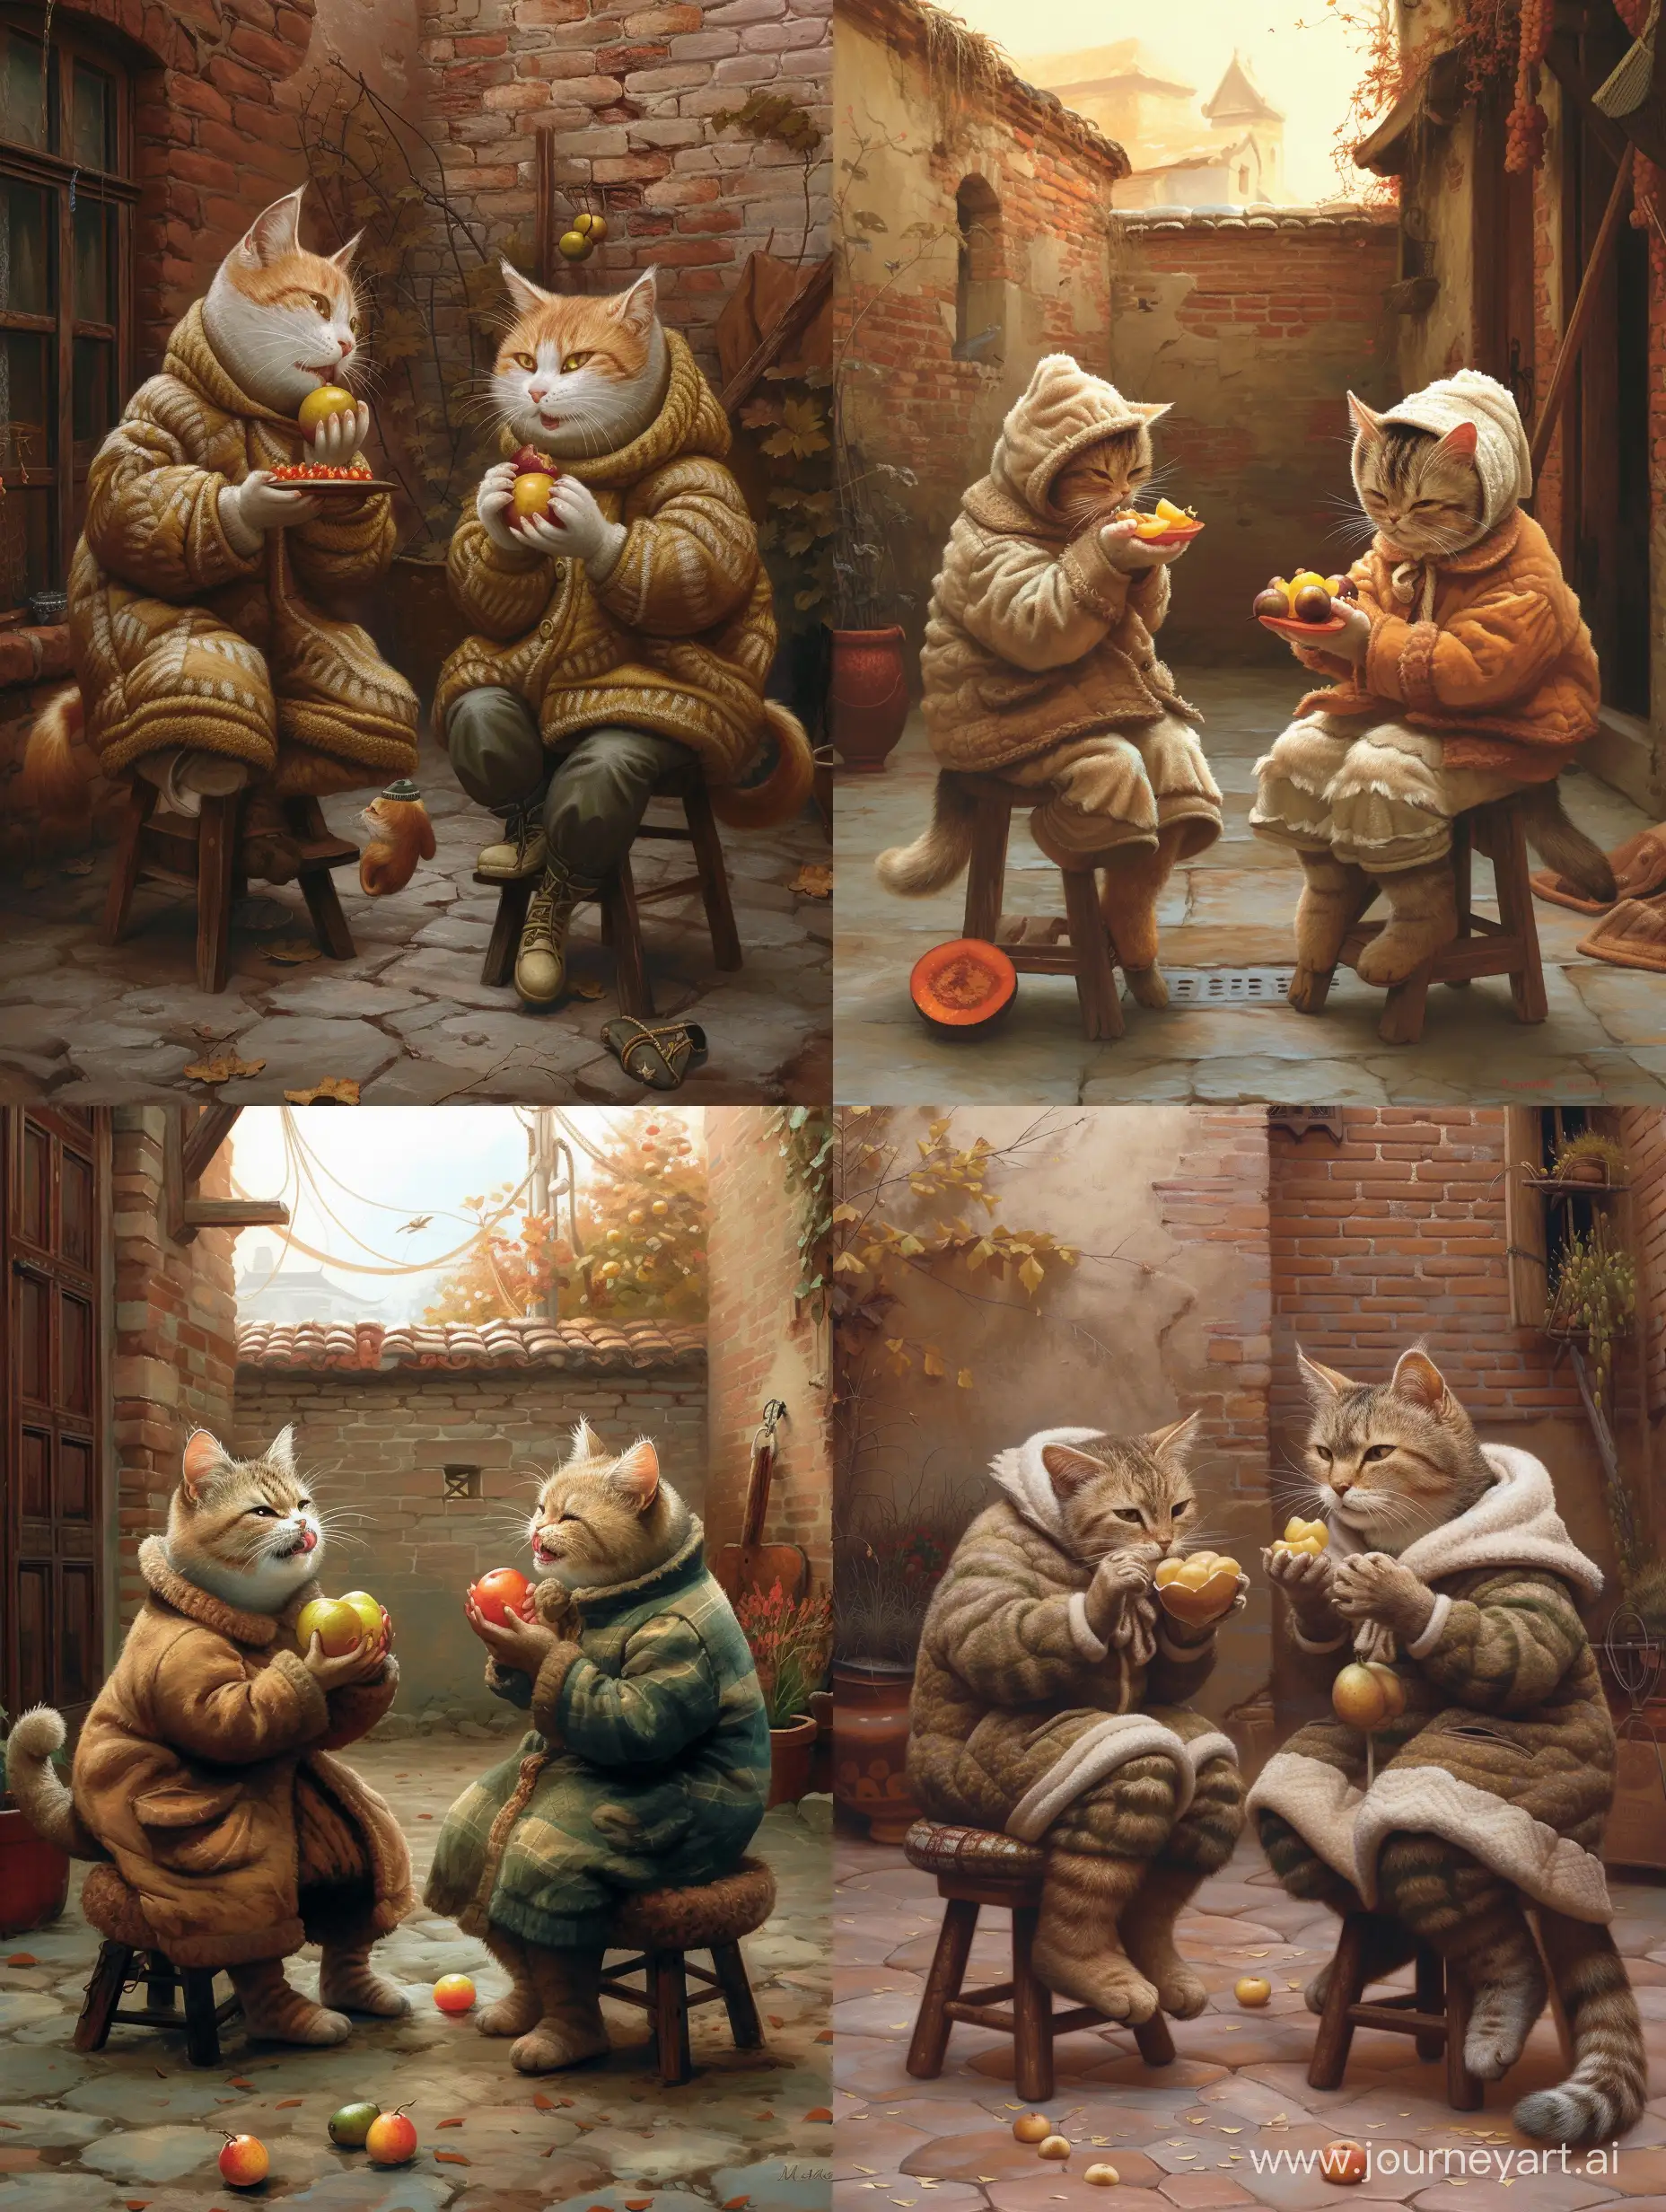 Cats wearing thick, cozy home clothes, sitting on small stools and eating fruit while chatting. The background is a rural courtyard, featuring traditional elements like a brick wall, a few plants, and a rustic atmosphere. The cats should appear comfortable and engaged in conversation, capturing a sense of leisure and companionship in this charming, homely rural setting.